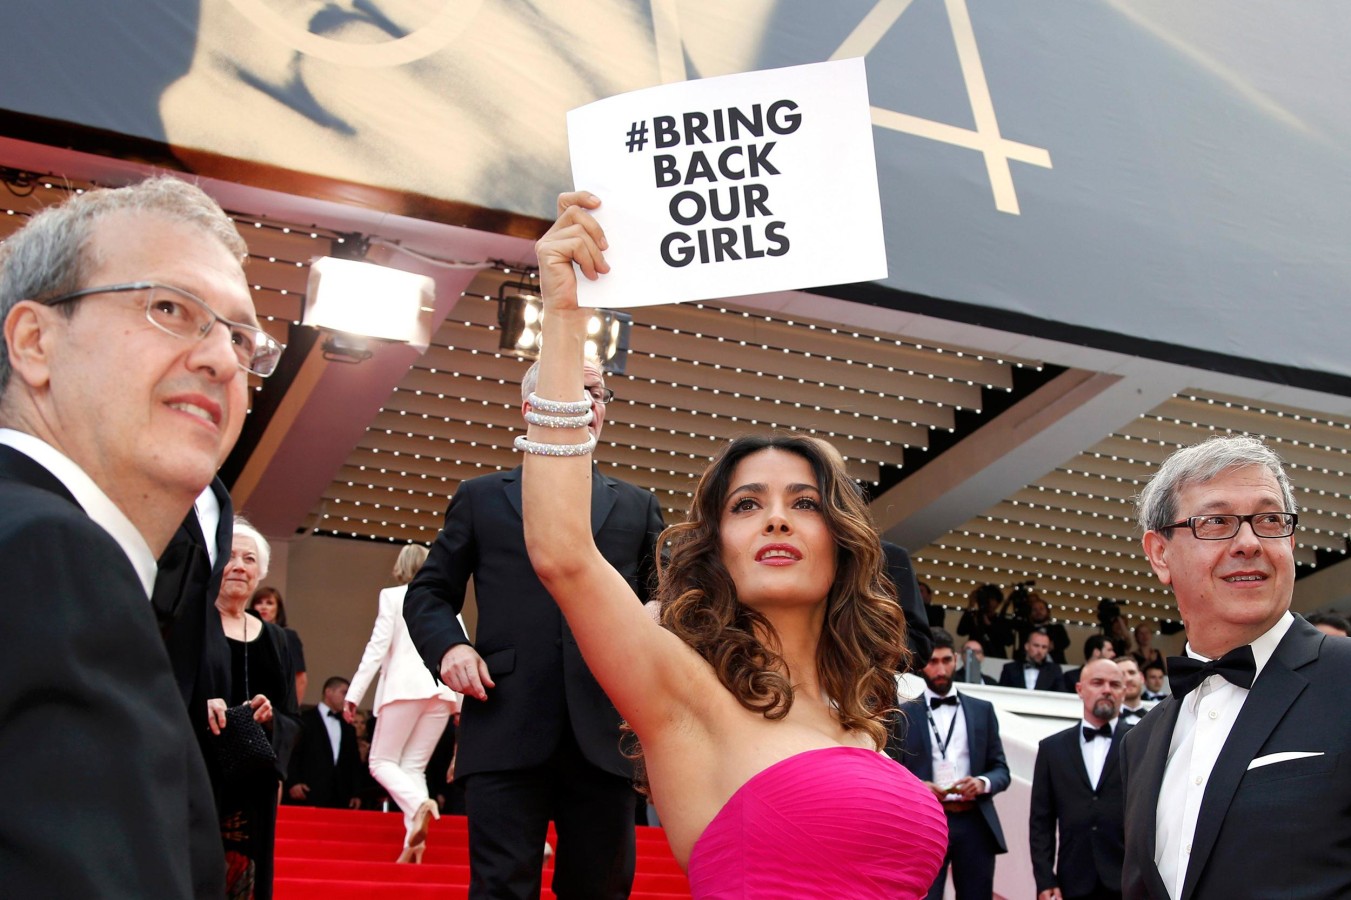 Image: Actress Salma Hayek holds a placard which reads 'Bring back our girls'at the 67th Cannes Film Festival in Cannes